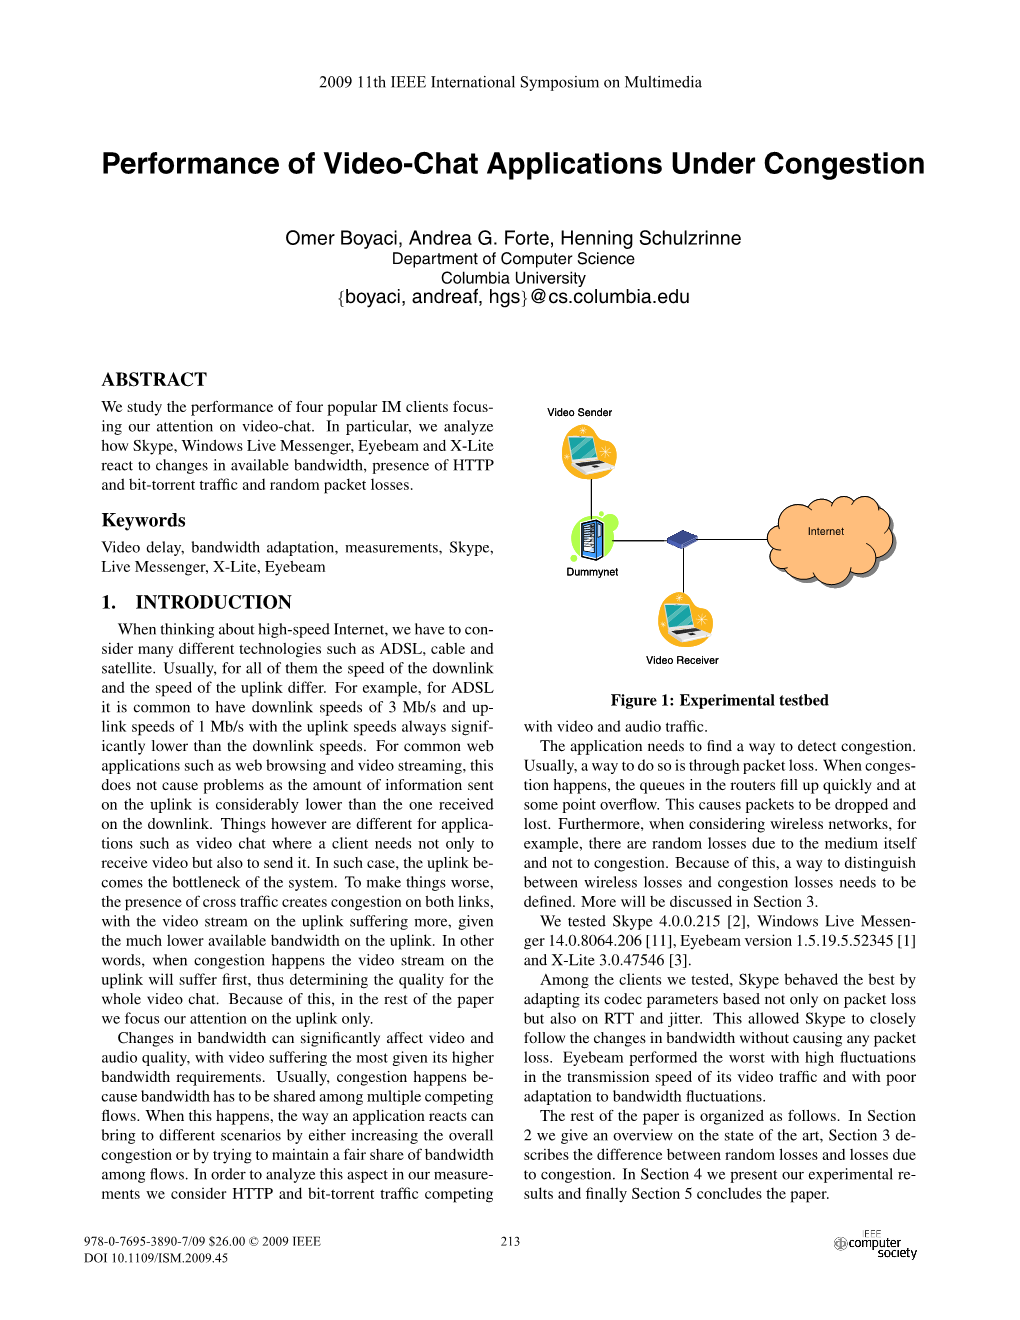 Performance of Video-Chat Applications Under Congestion